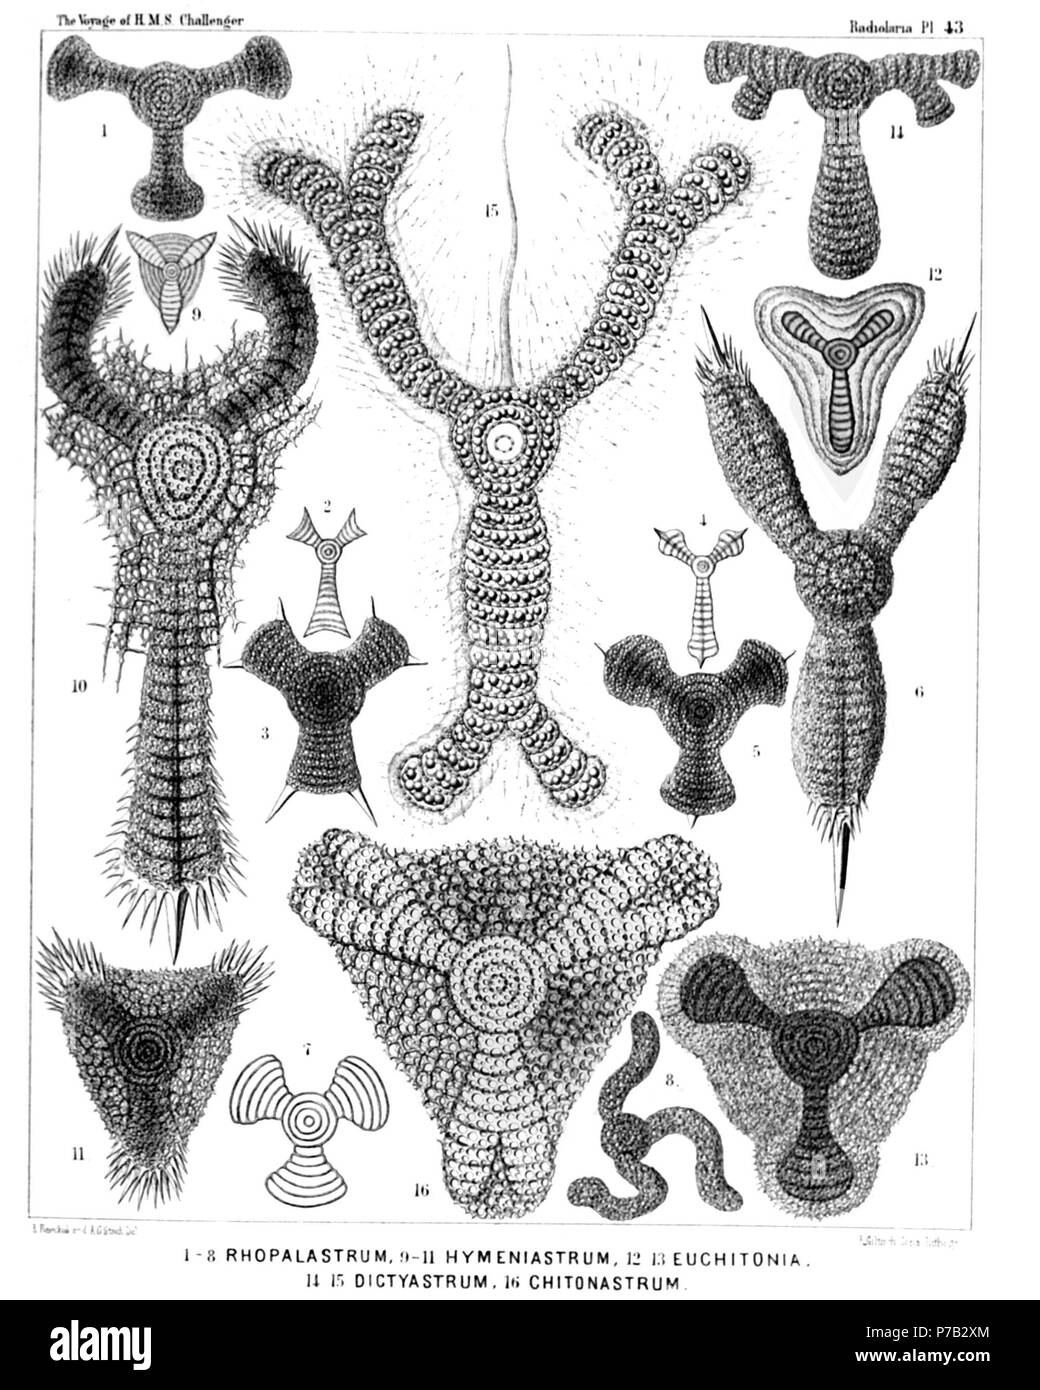 English: Illustration from Report on the Radiolaria collected by H.M.S. Challenger during the years 1873-1876. Part III. Original description follows:  Plate 43. Porodiscida.  Diam.  Fig. 1. Rhopalastrum malleus, n. sp., × 100  Fig. 2. Rhopalastrum ypsilinum, n. sp., × 50  Fig. 3. Rhopalastrum hexaceros, n. sp., × 100  Fig. 4. Rhopalastrum triceros, n. sp., × 50  Fig. 5. Rhopalastrum trispinosum, n. sp. (vel Dictyastrum trispinosum), × 150  Fig. 6. Rhopalastrum arcticum, n. sp., × 300  Fig. 7. Rhopalastrum hexagonum, n. sp. (vel Dictyastrum hexagonum), × 100  Fig. 8. Rhopalastrum irregulare, n Stock Photo